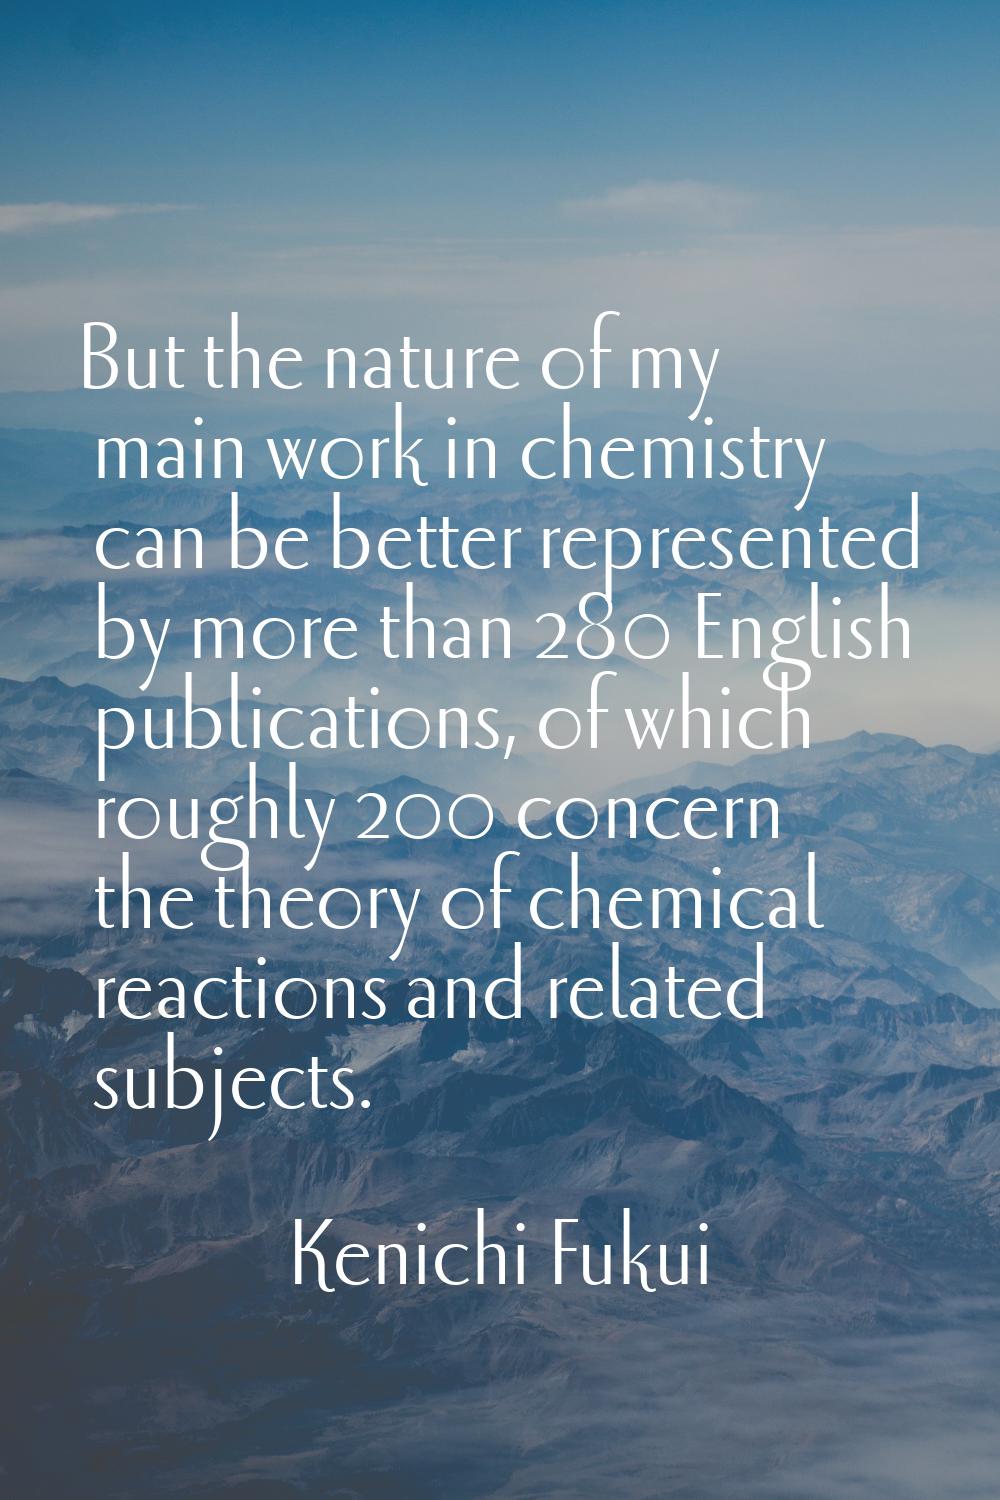 But the nature of my main work in chemistry can be better represented by more than 280 English publ